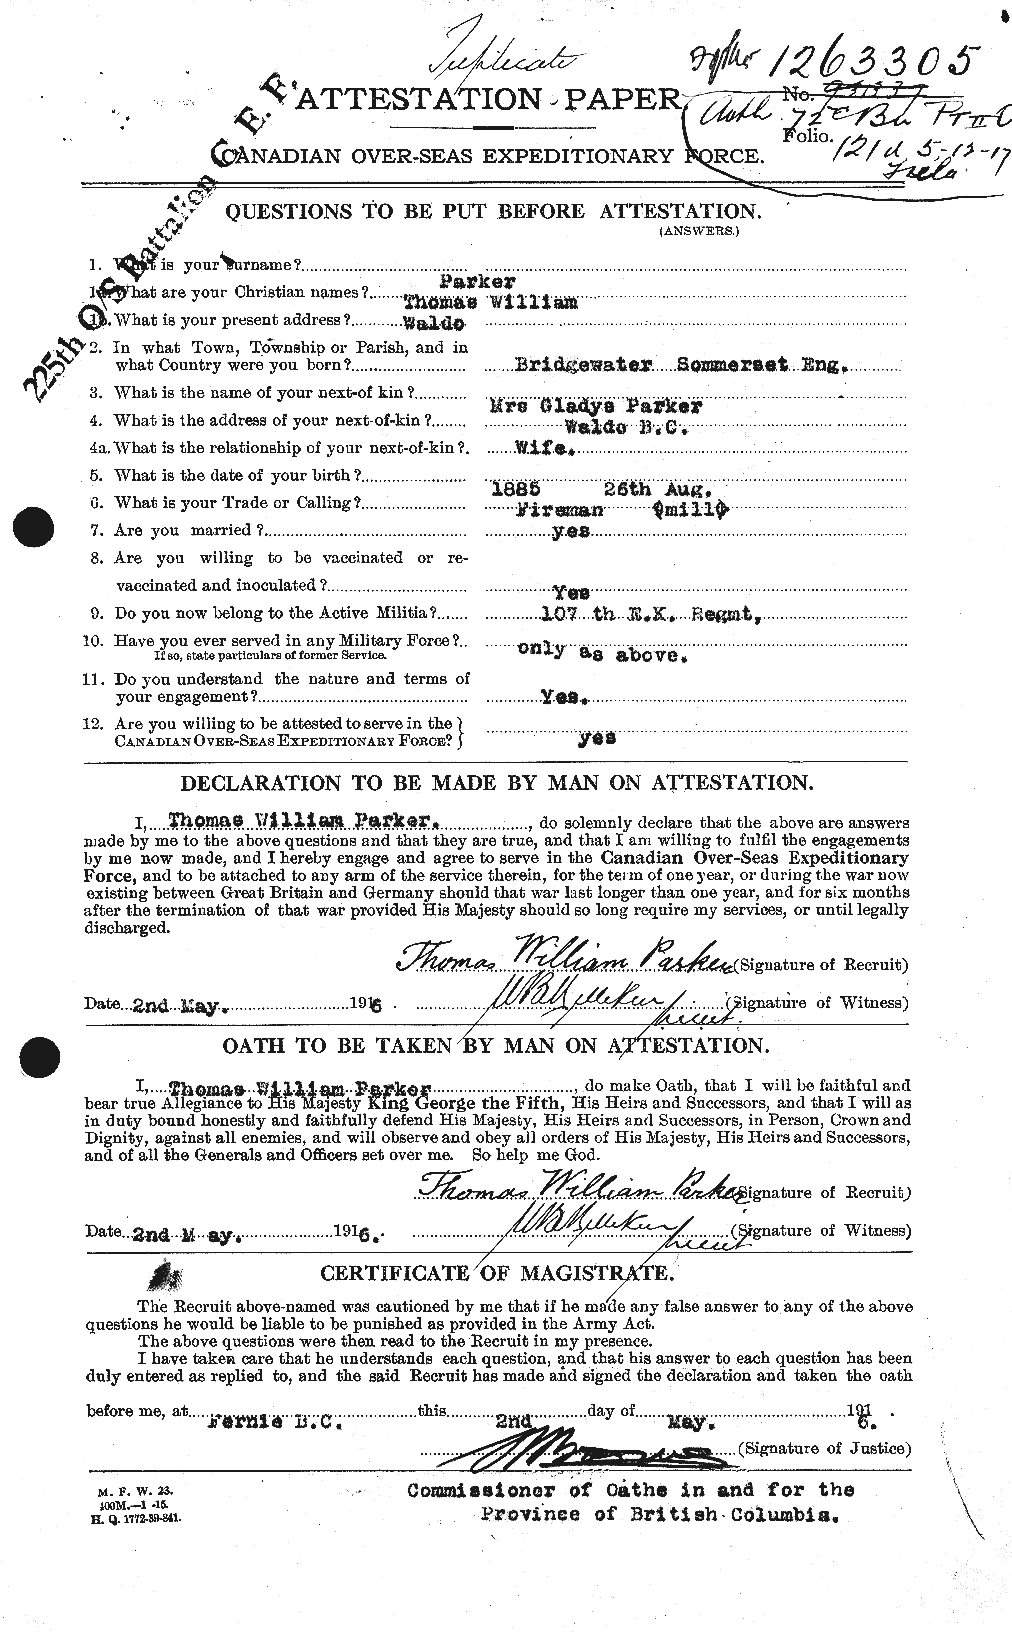 Personnel Records of the First World War - CEF 565672a